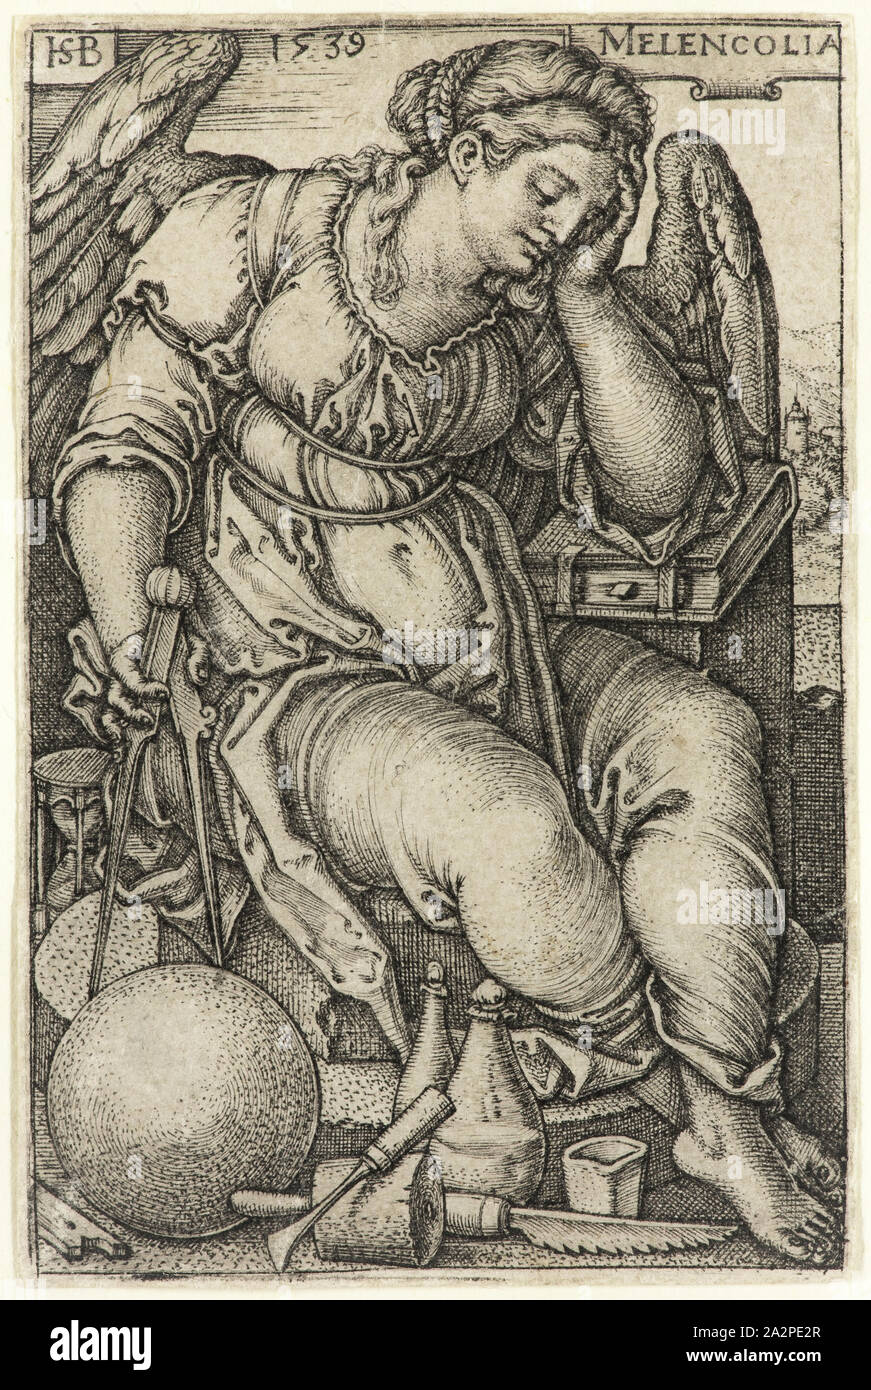 Hans Sebald Beham, German, 1500-1550, Melancholia, 1539, engraving printed in black ink on laid paper, Sheet (trimmed within plate mark): 3 1/8 × 2 inches (7.9 × 5.1 cm Stock Photo